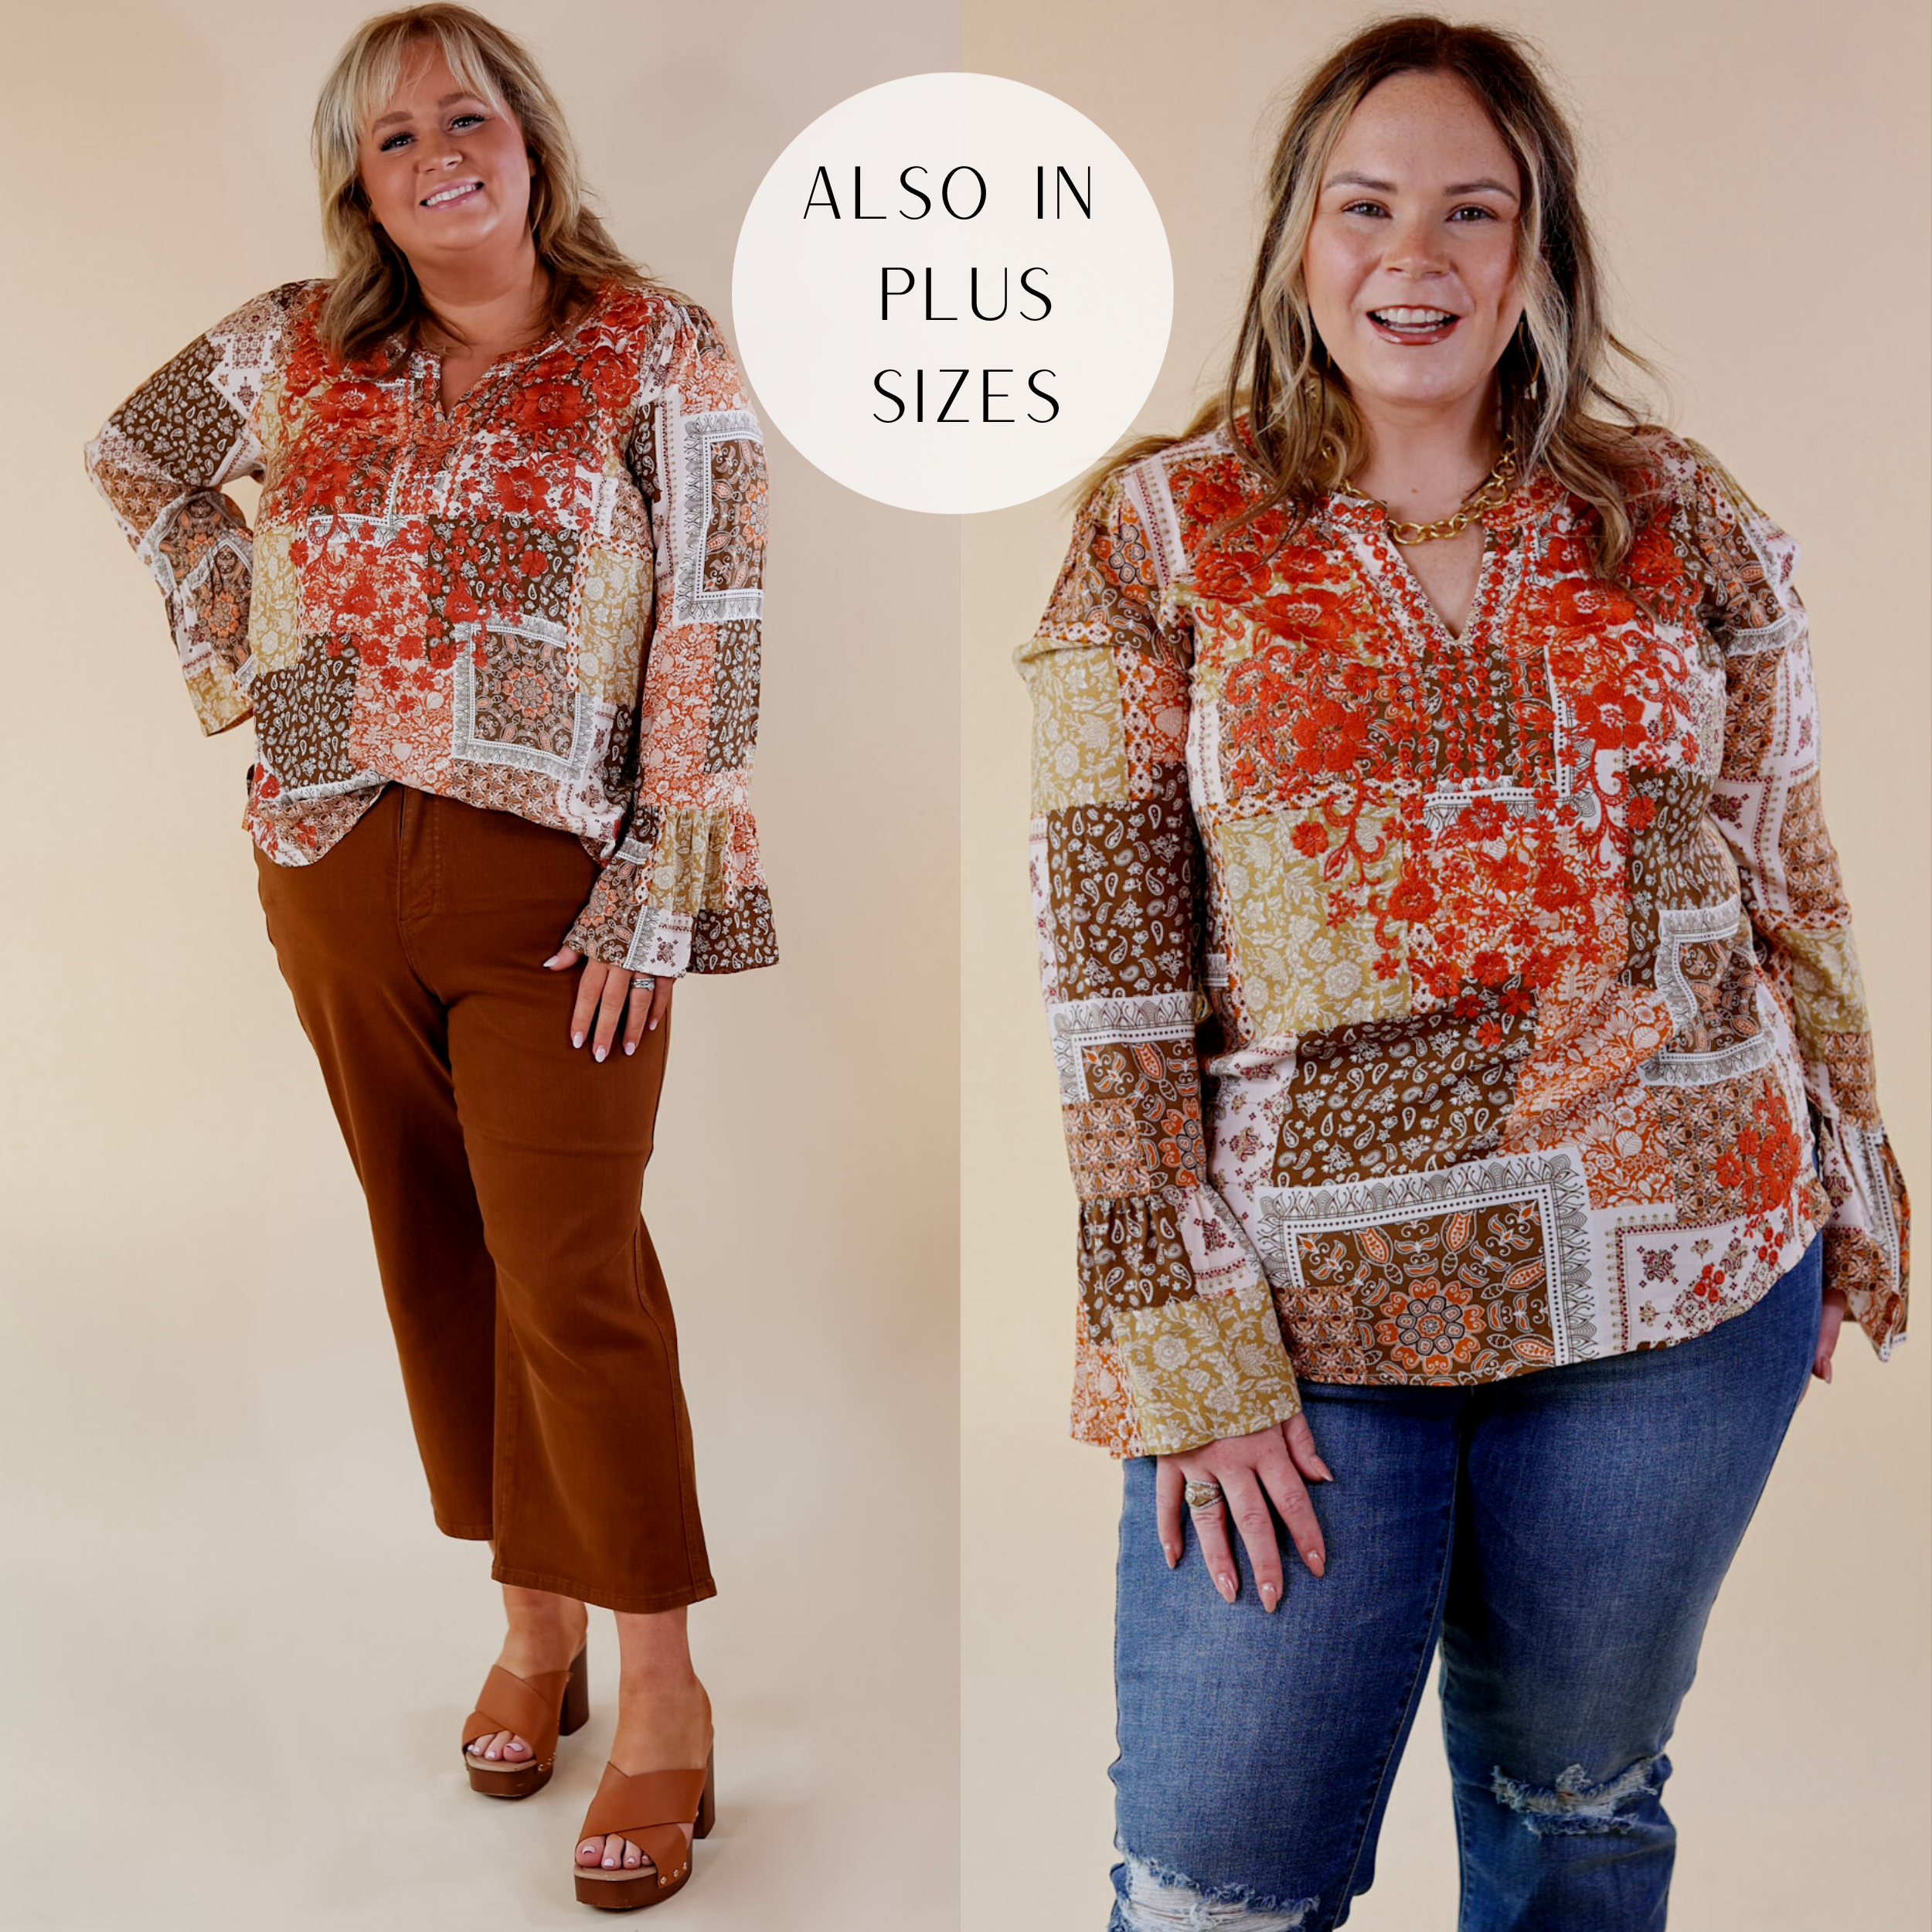 Model is wearing a top with a notched neckline, sleeves that flare at the wrist, floral rust orange embroidery, and a variety of paisley and floral prints. Models has paired the top with brown pants, low white heels, and gold tone jewelry.